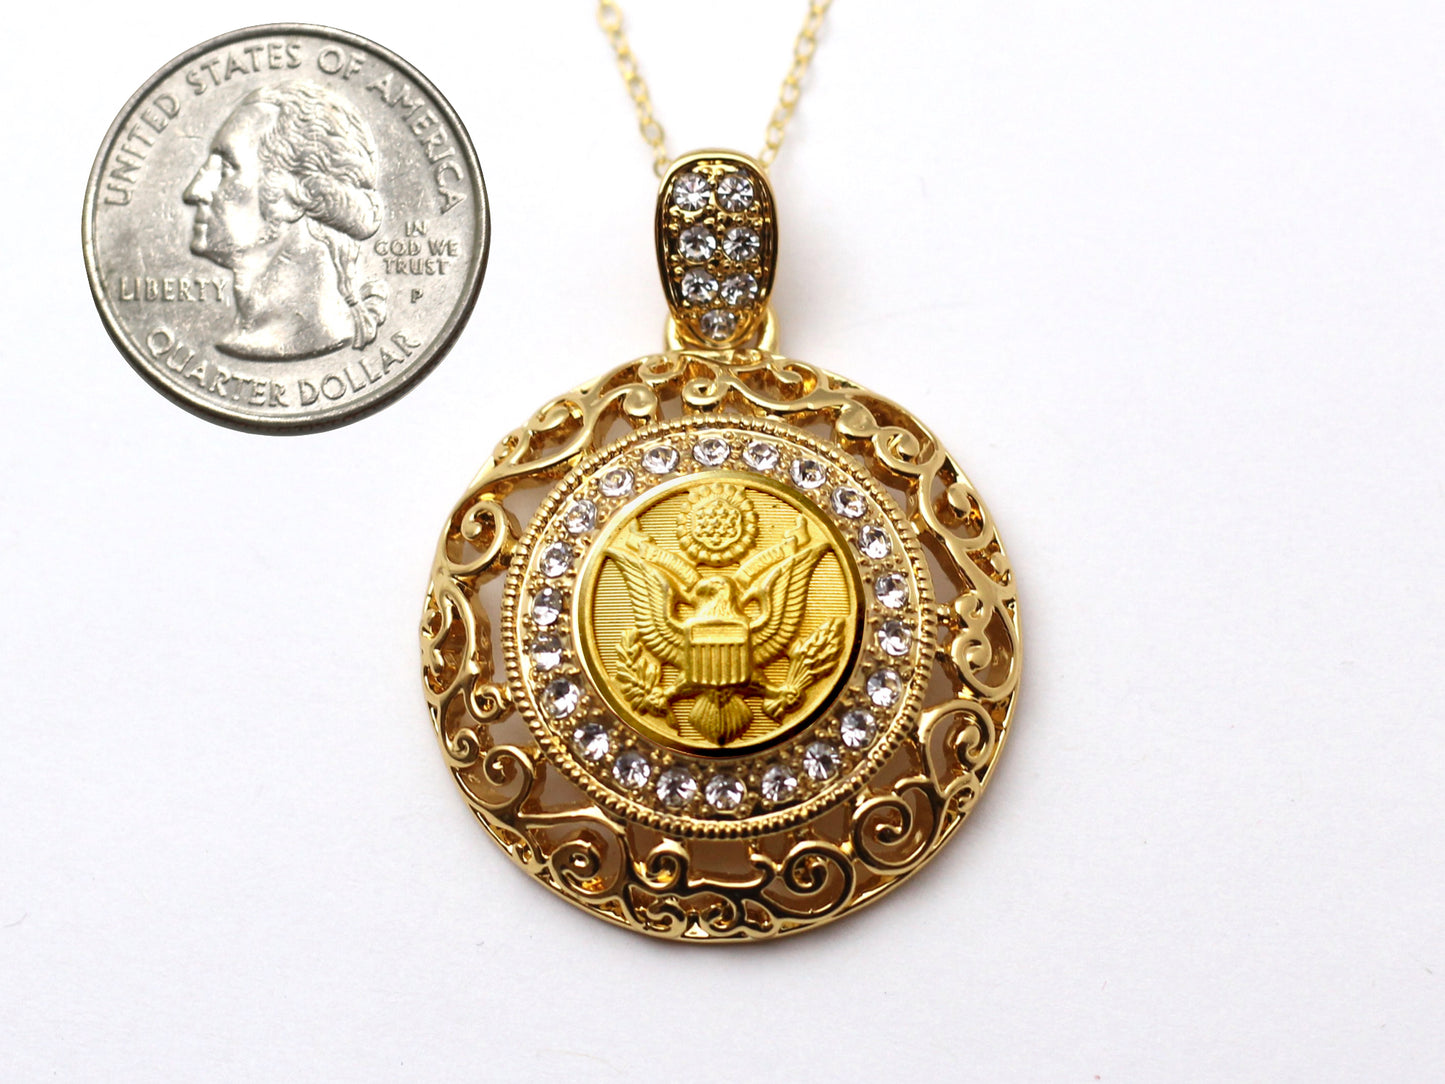 Army Button Necklace - Large Gold Rhinestone Pendant